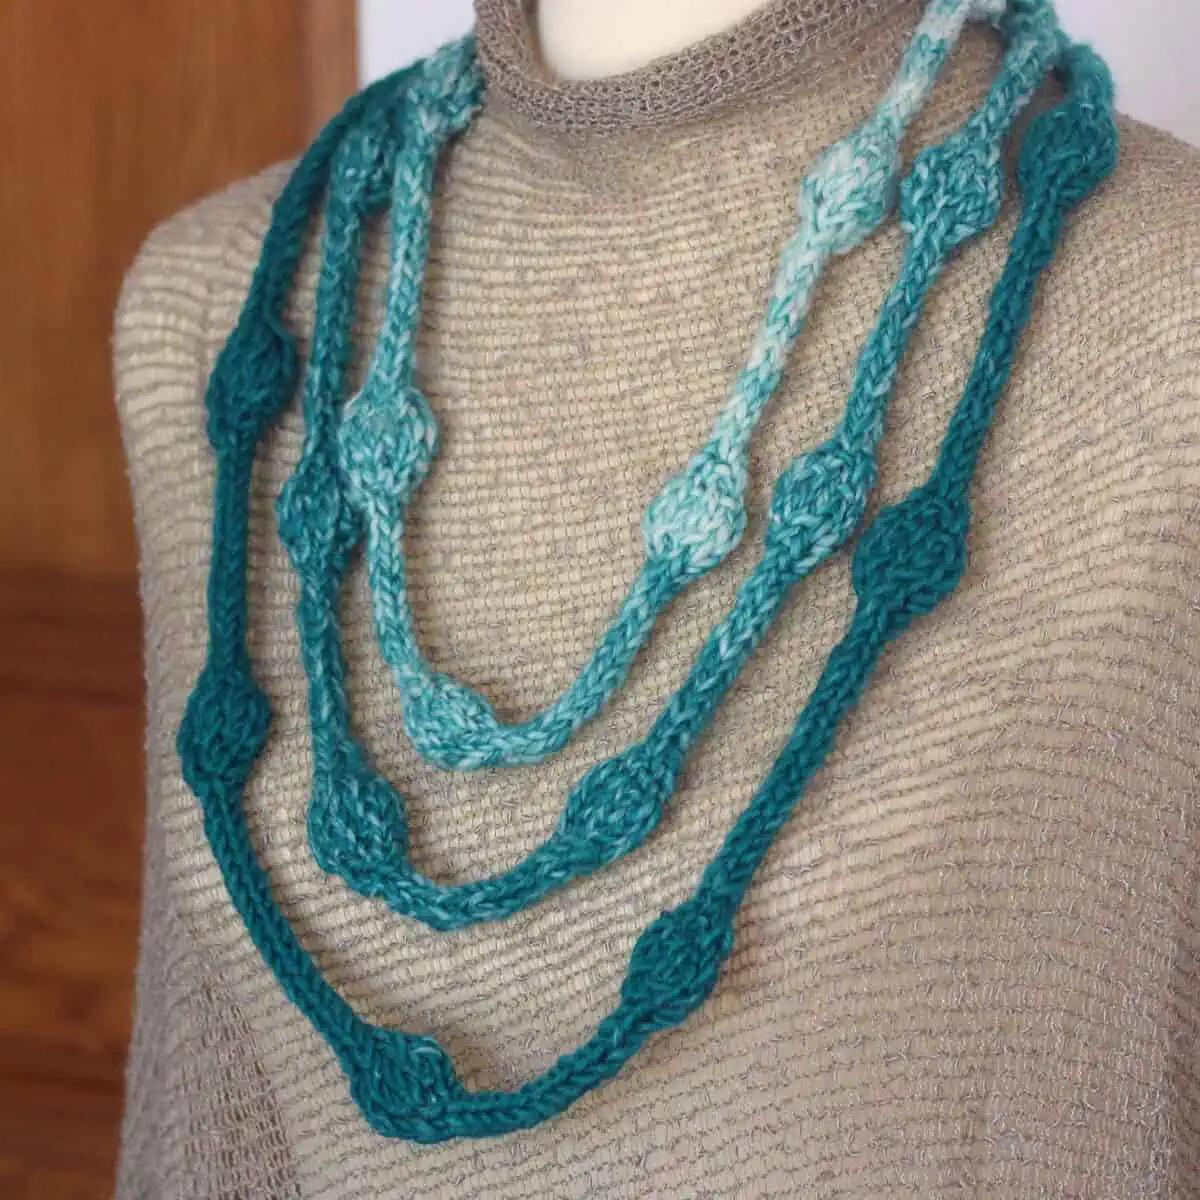 Close-up of a Necklace with Beaded Texture knitted in blue and white yarn colors worn on a torso.